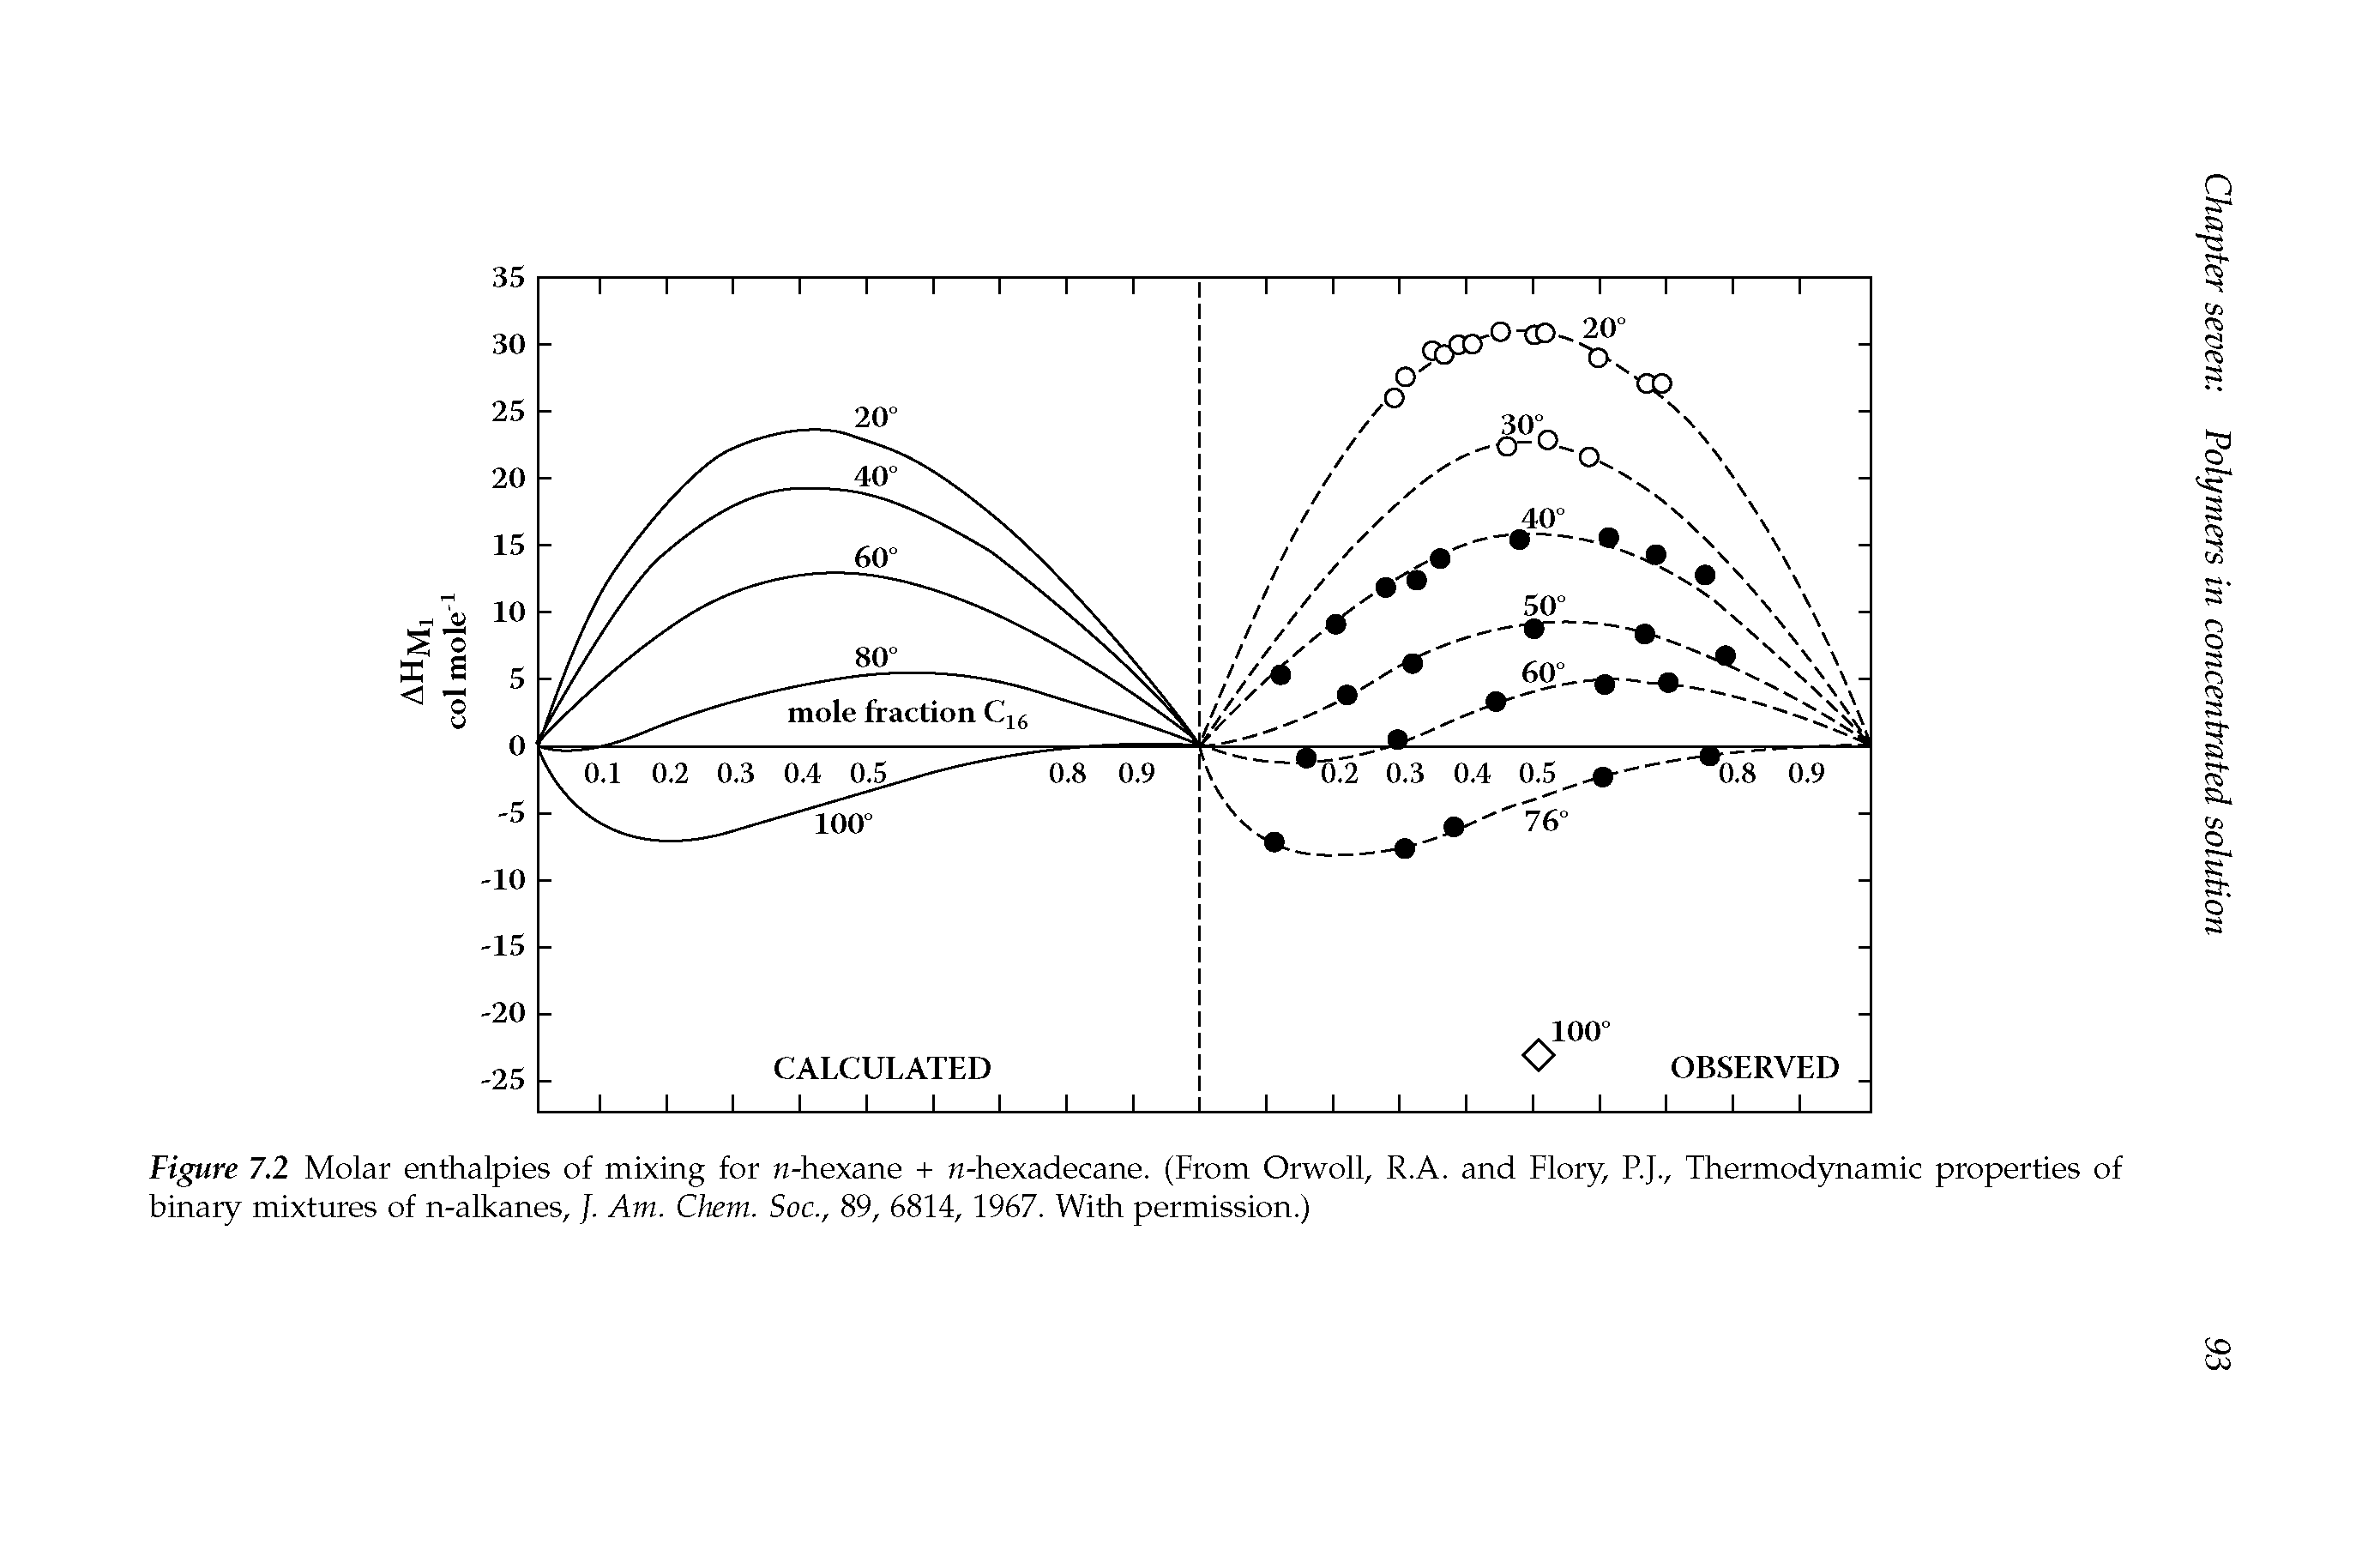 Figure 7.2 Molar enthalpies of mixing for n-hexane + n-hexadecane. (From Orwoll, R.A. and Flory, RJ., Thermodynamic properties of binary mixtures of n-alkanes, /. Am. Chem. Soc., 89, 6814, 1967. With permission.)...